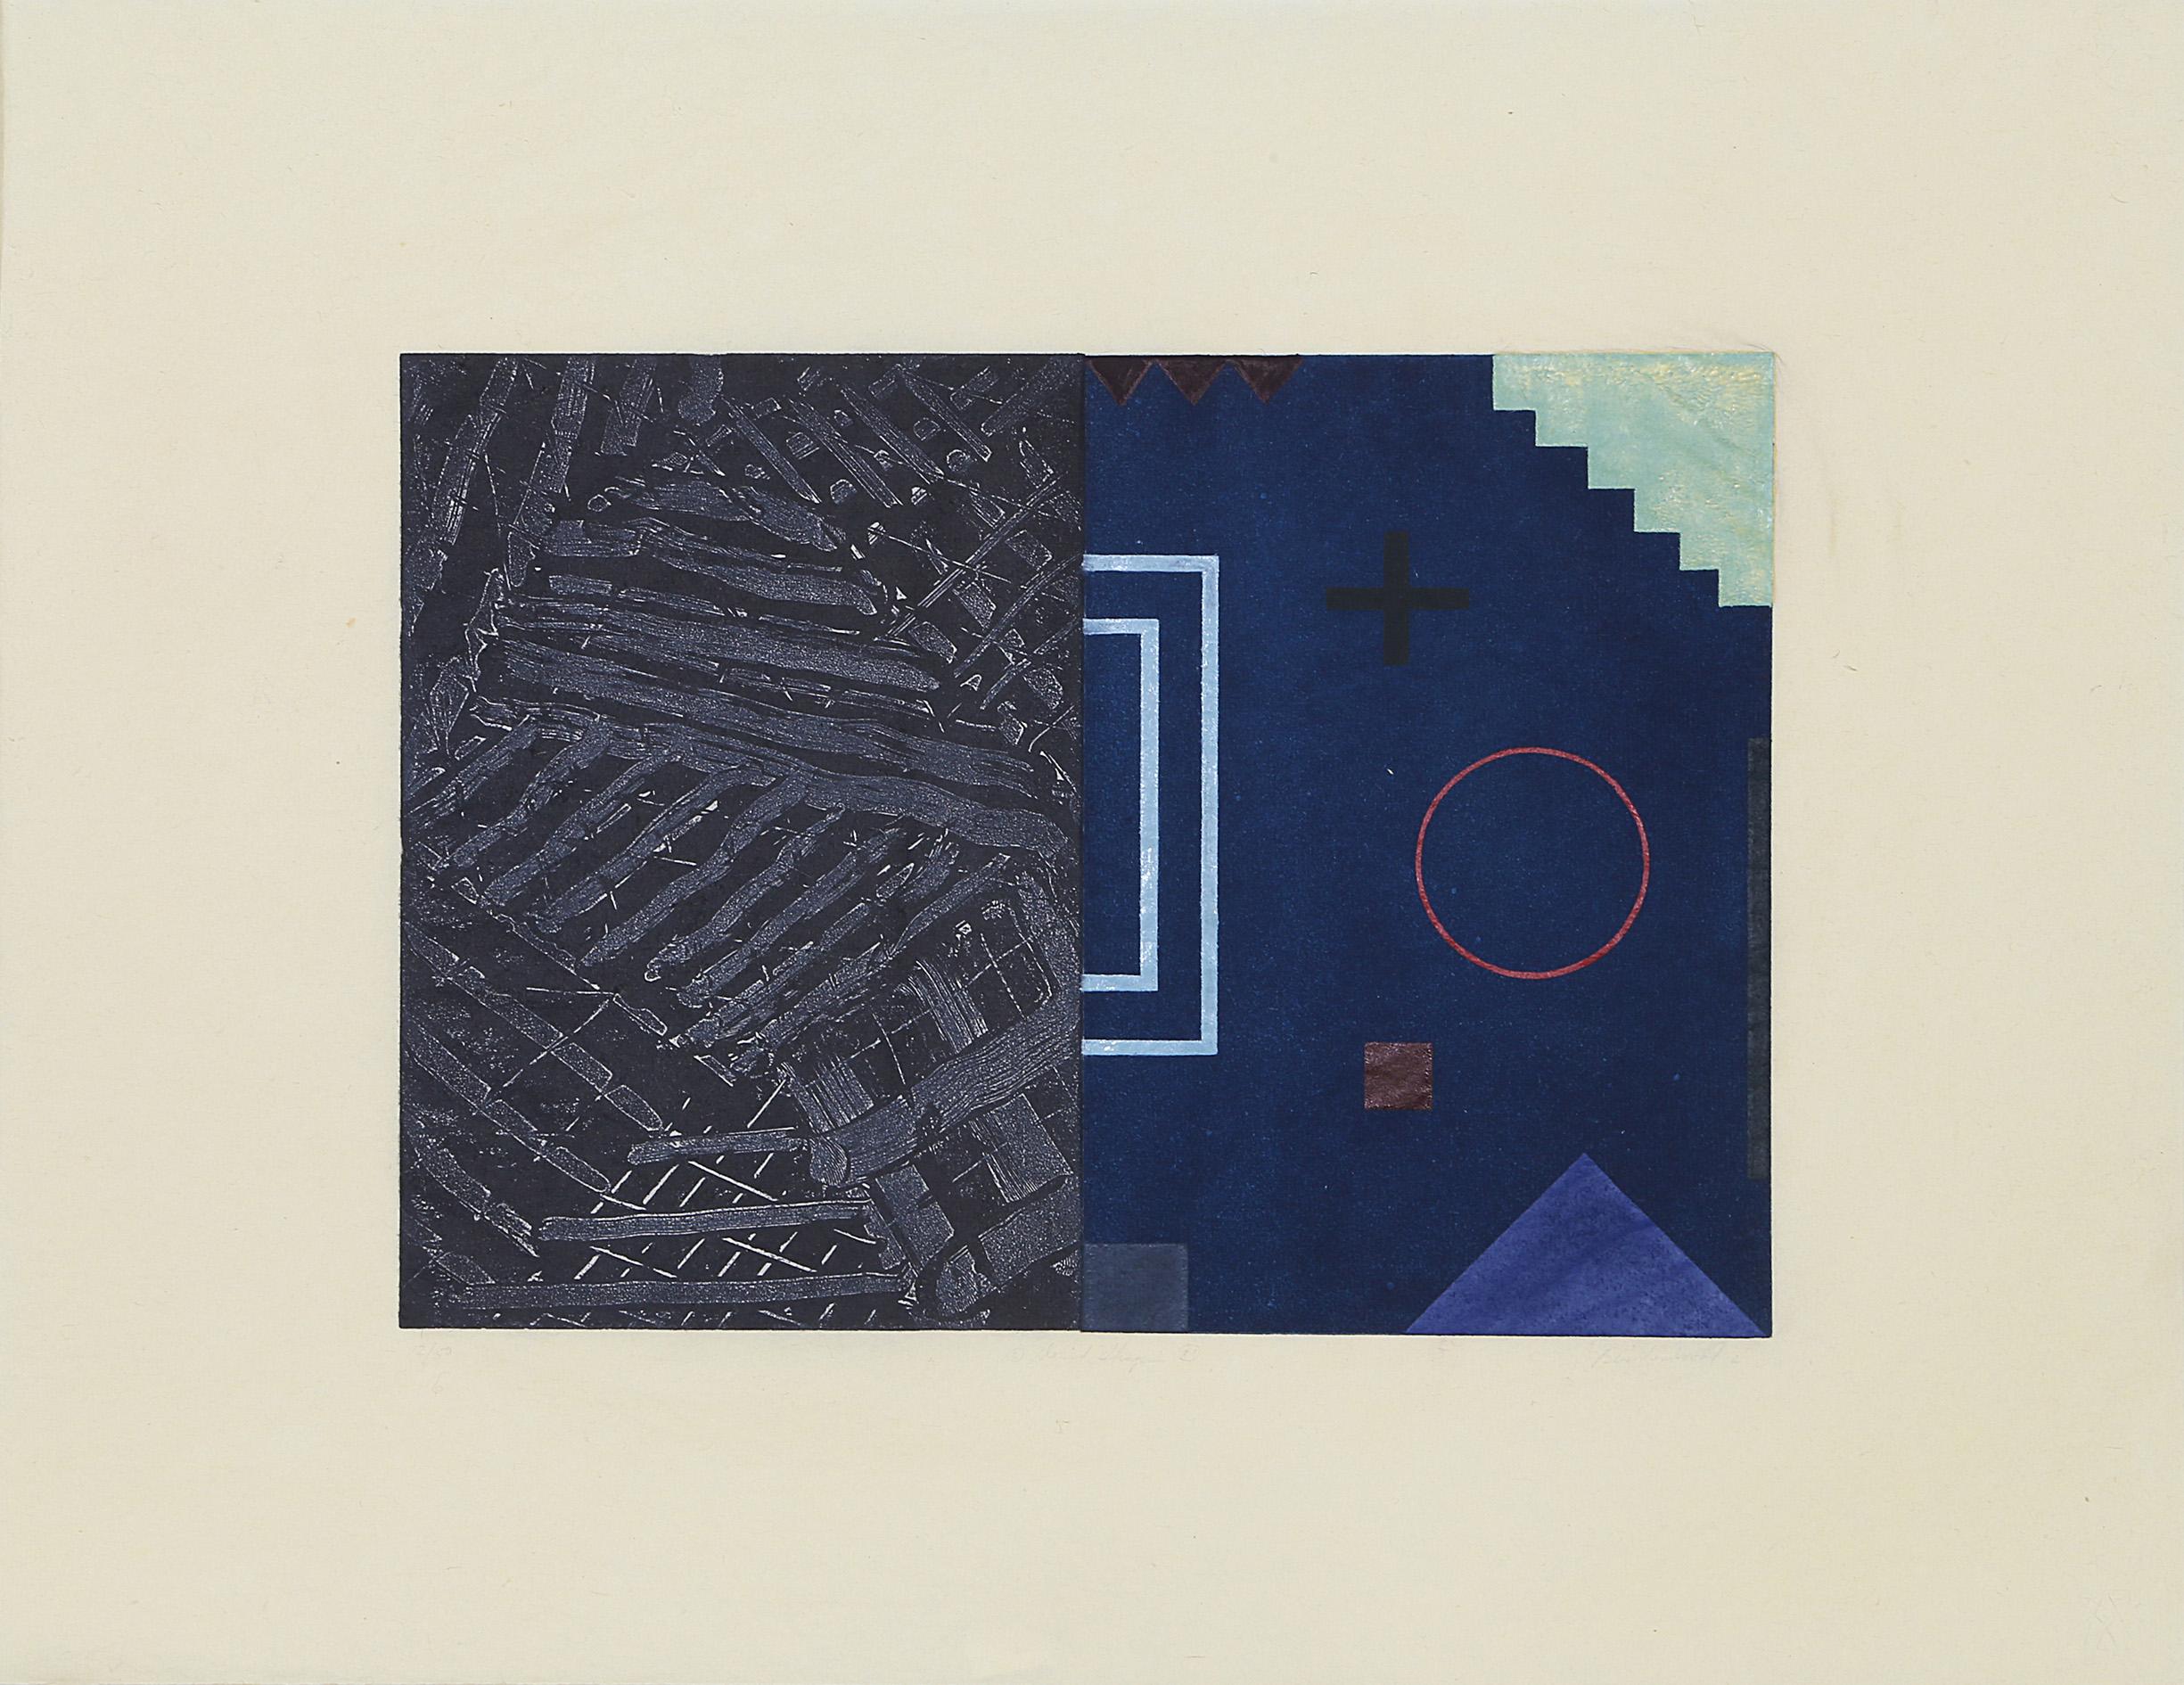 A detailed abstract geometric print by David Shapiro featuring a blend of aquatint and etching methods on Sekishu, a type of handmade Japanese paper. One half of the composition features messy, almost hand-painted grid lines while the other half is